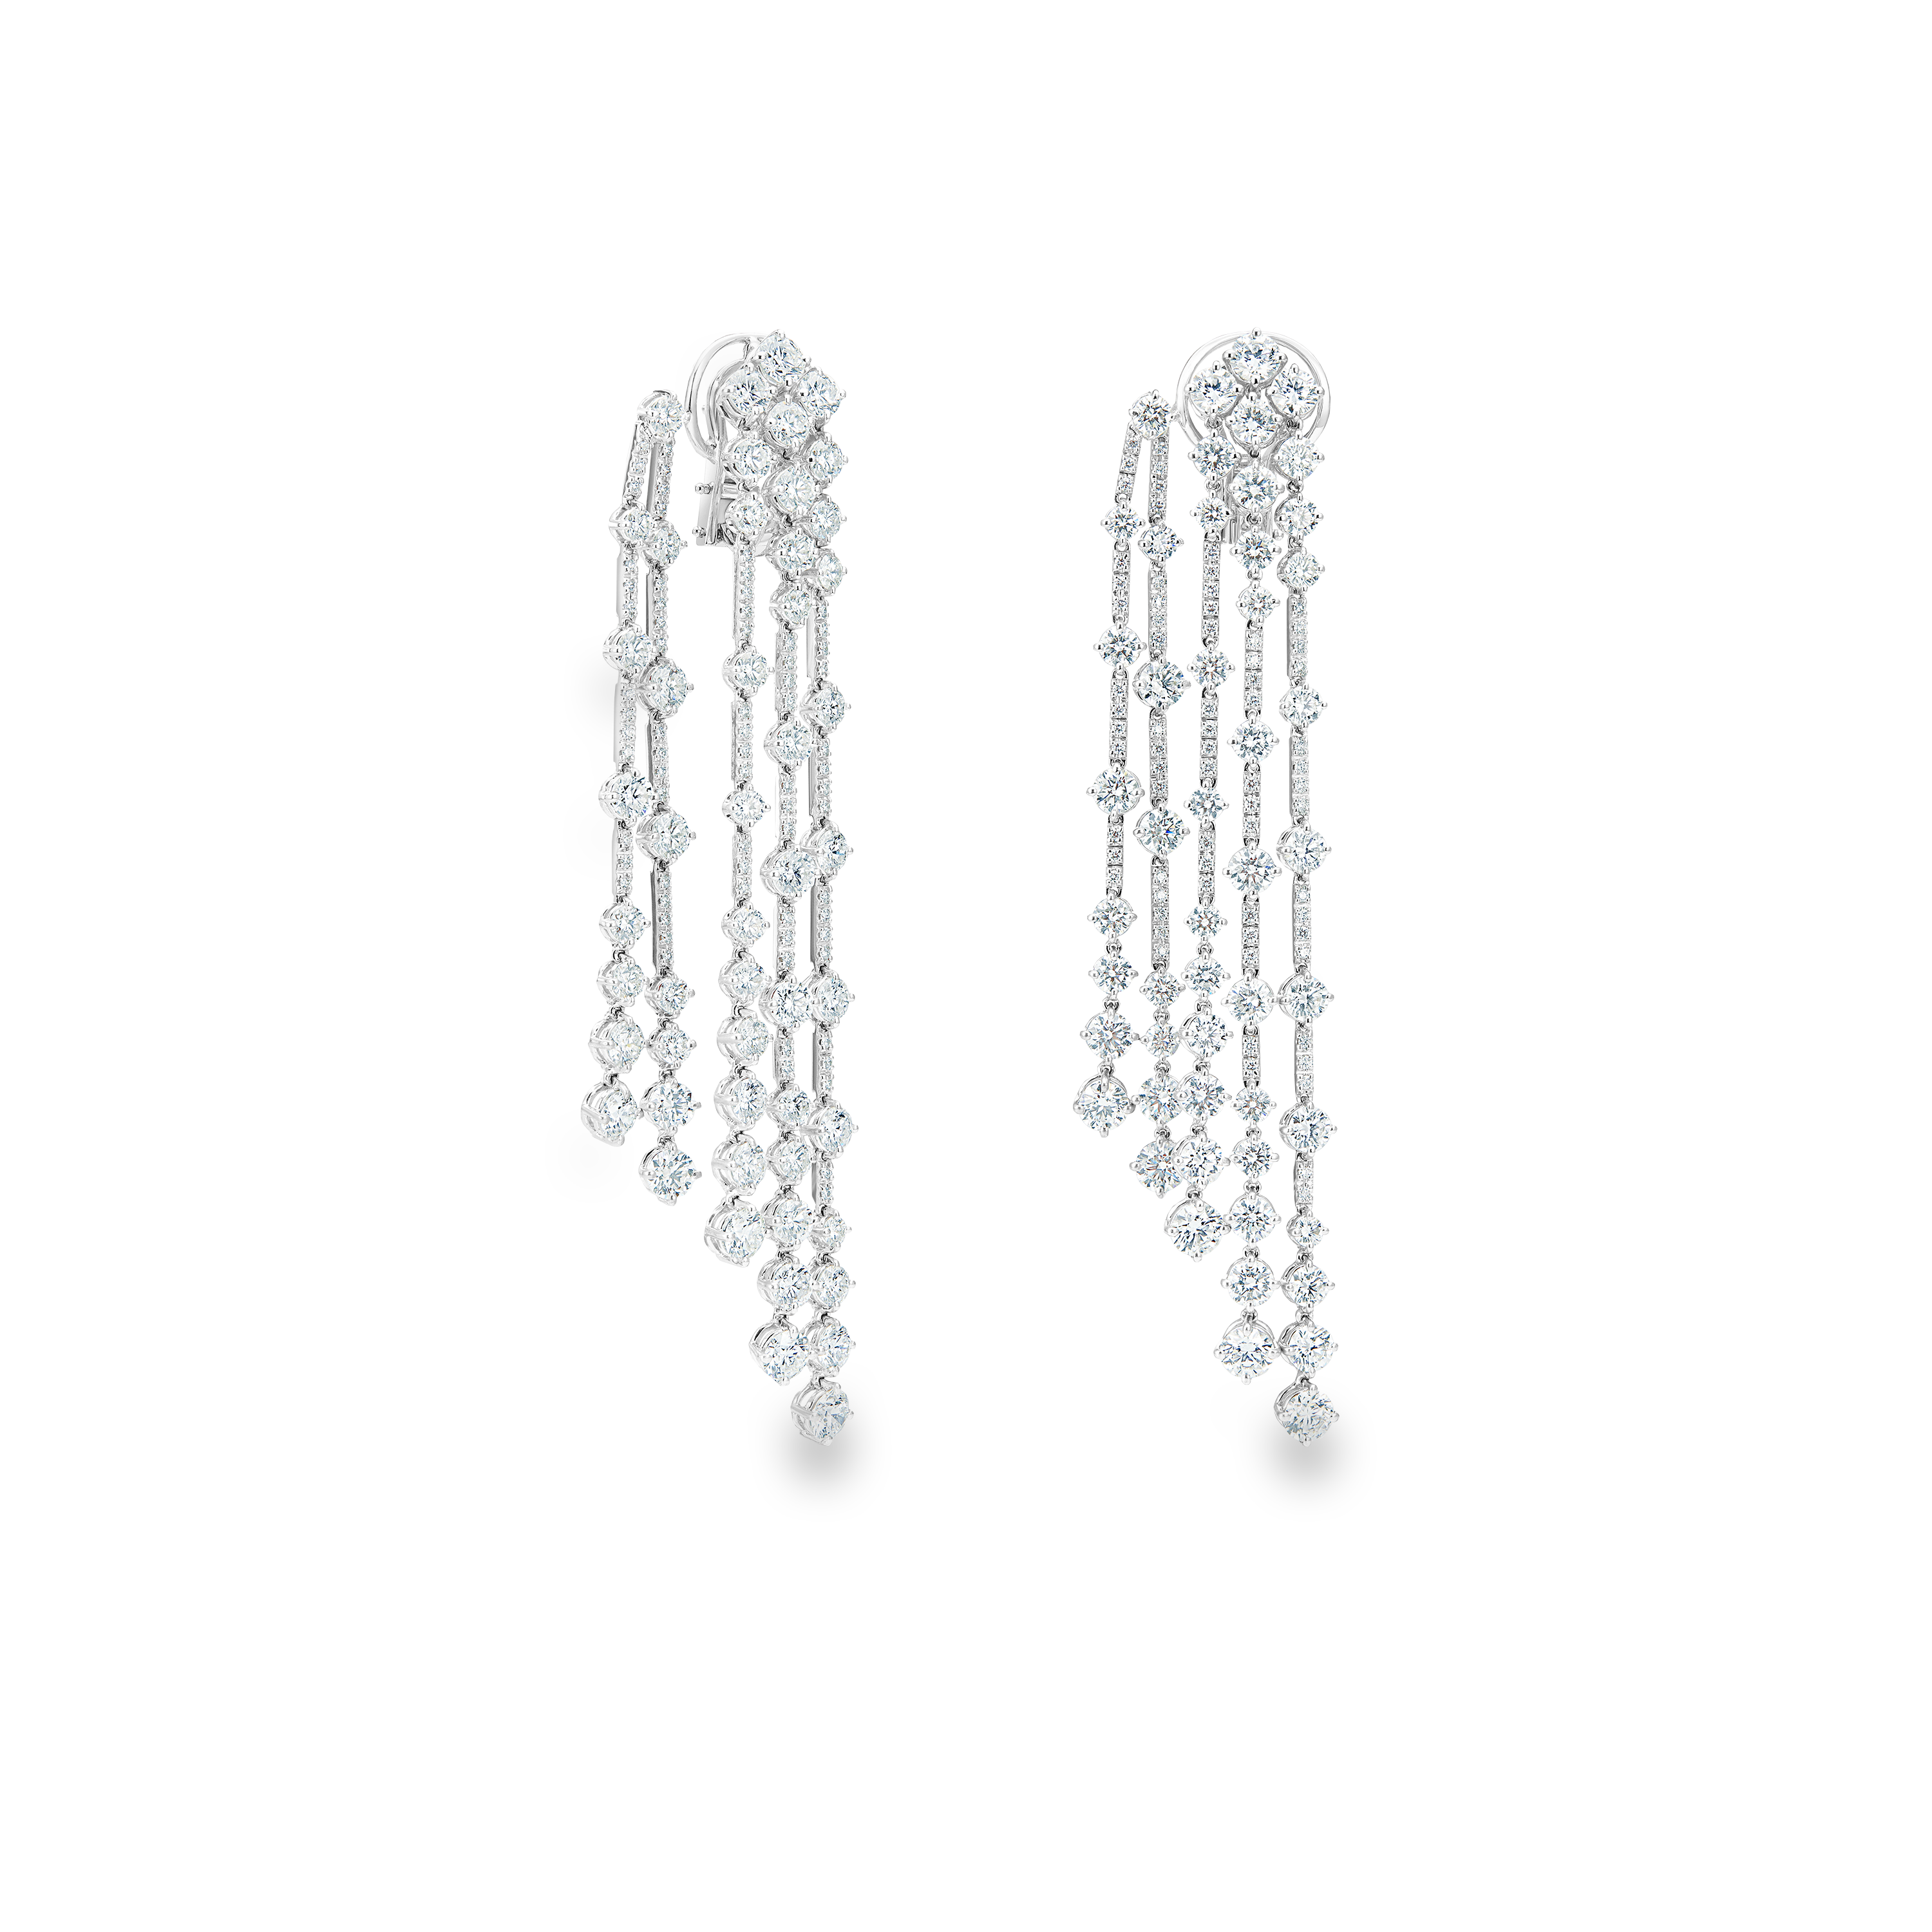 Arpeggia five line earrings in white gold, image 1